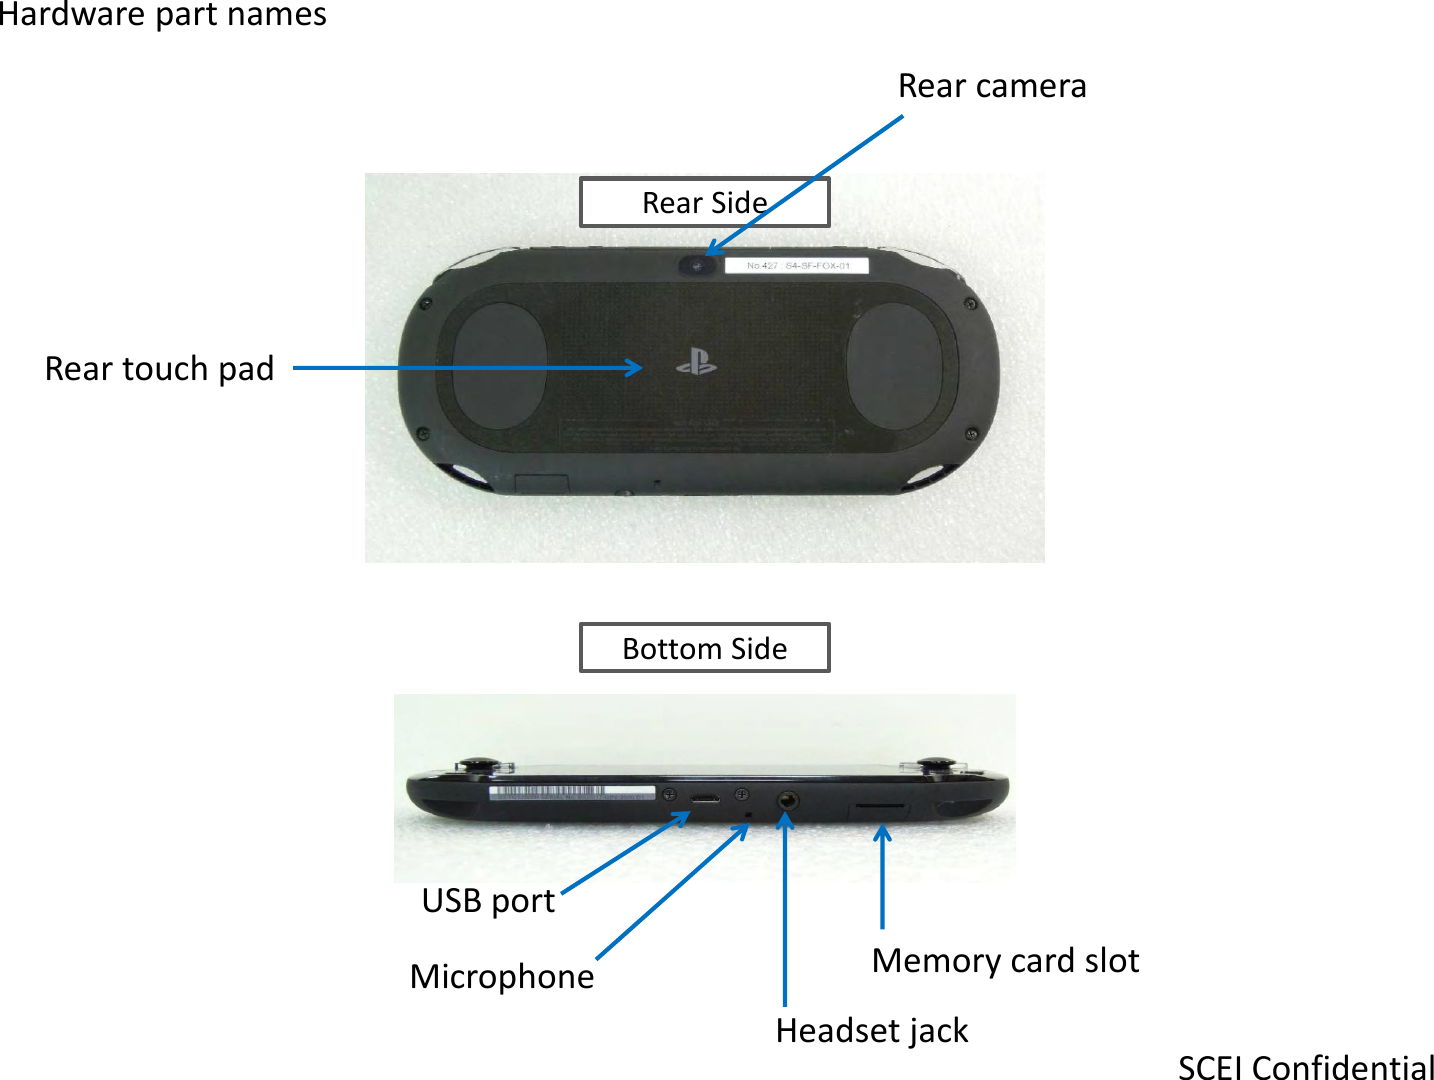 Rear Side Bottom Side SCEI Confidential Rear camera Rear touch pad Memory card slot USB port Microphone Headset jack Hardware part names 